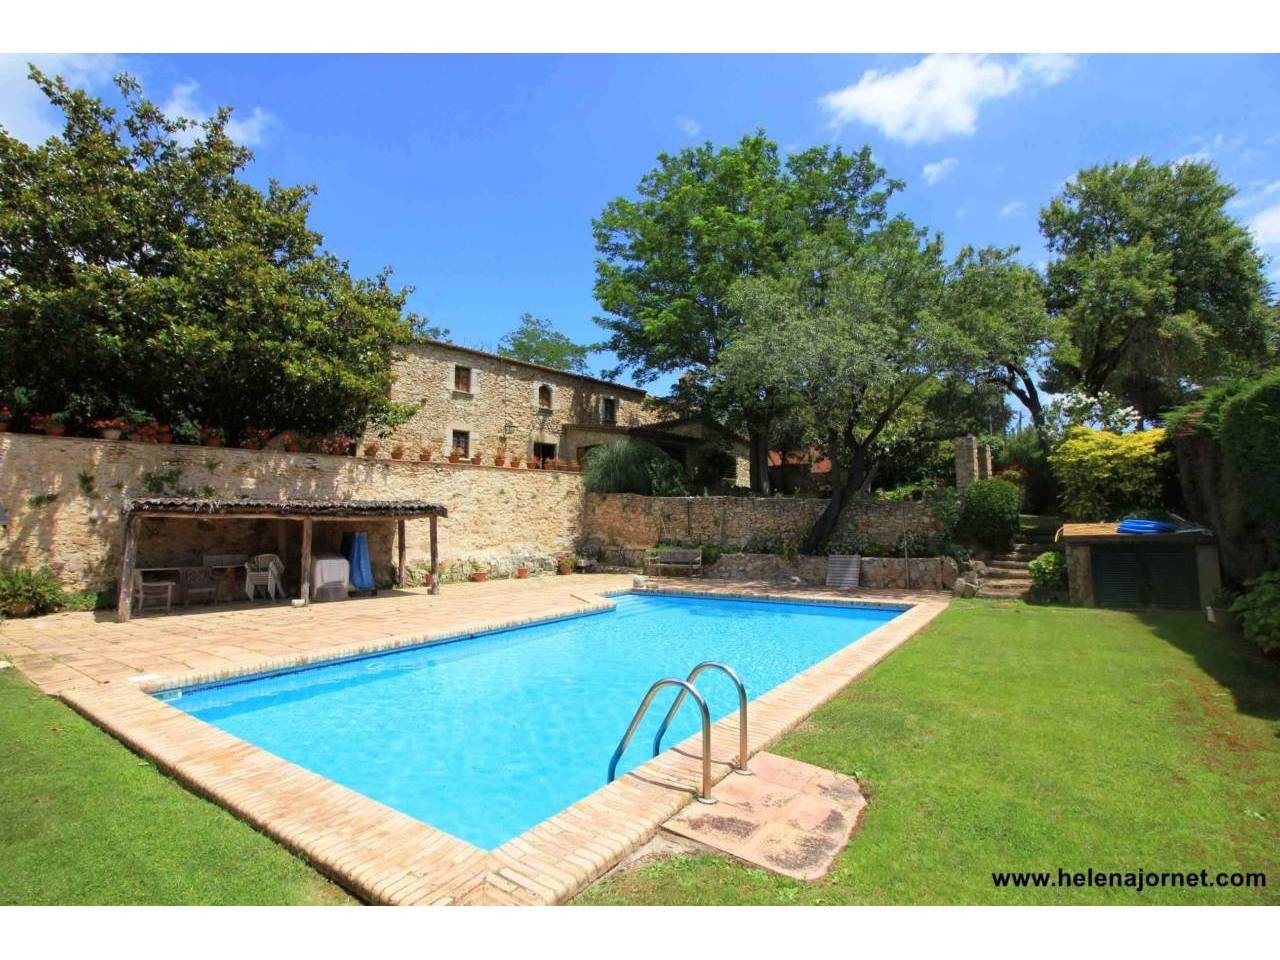 Exclusive Catalan farmhouse totally refurbished with swimming pool and wonderful garden - 1372